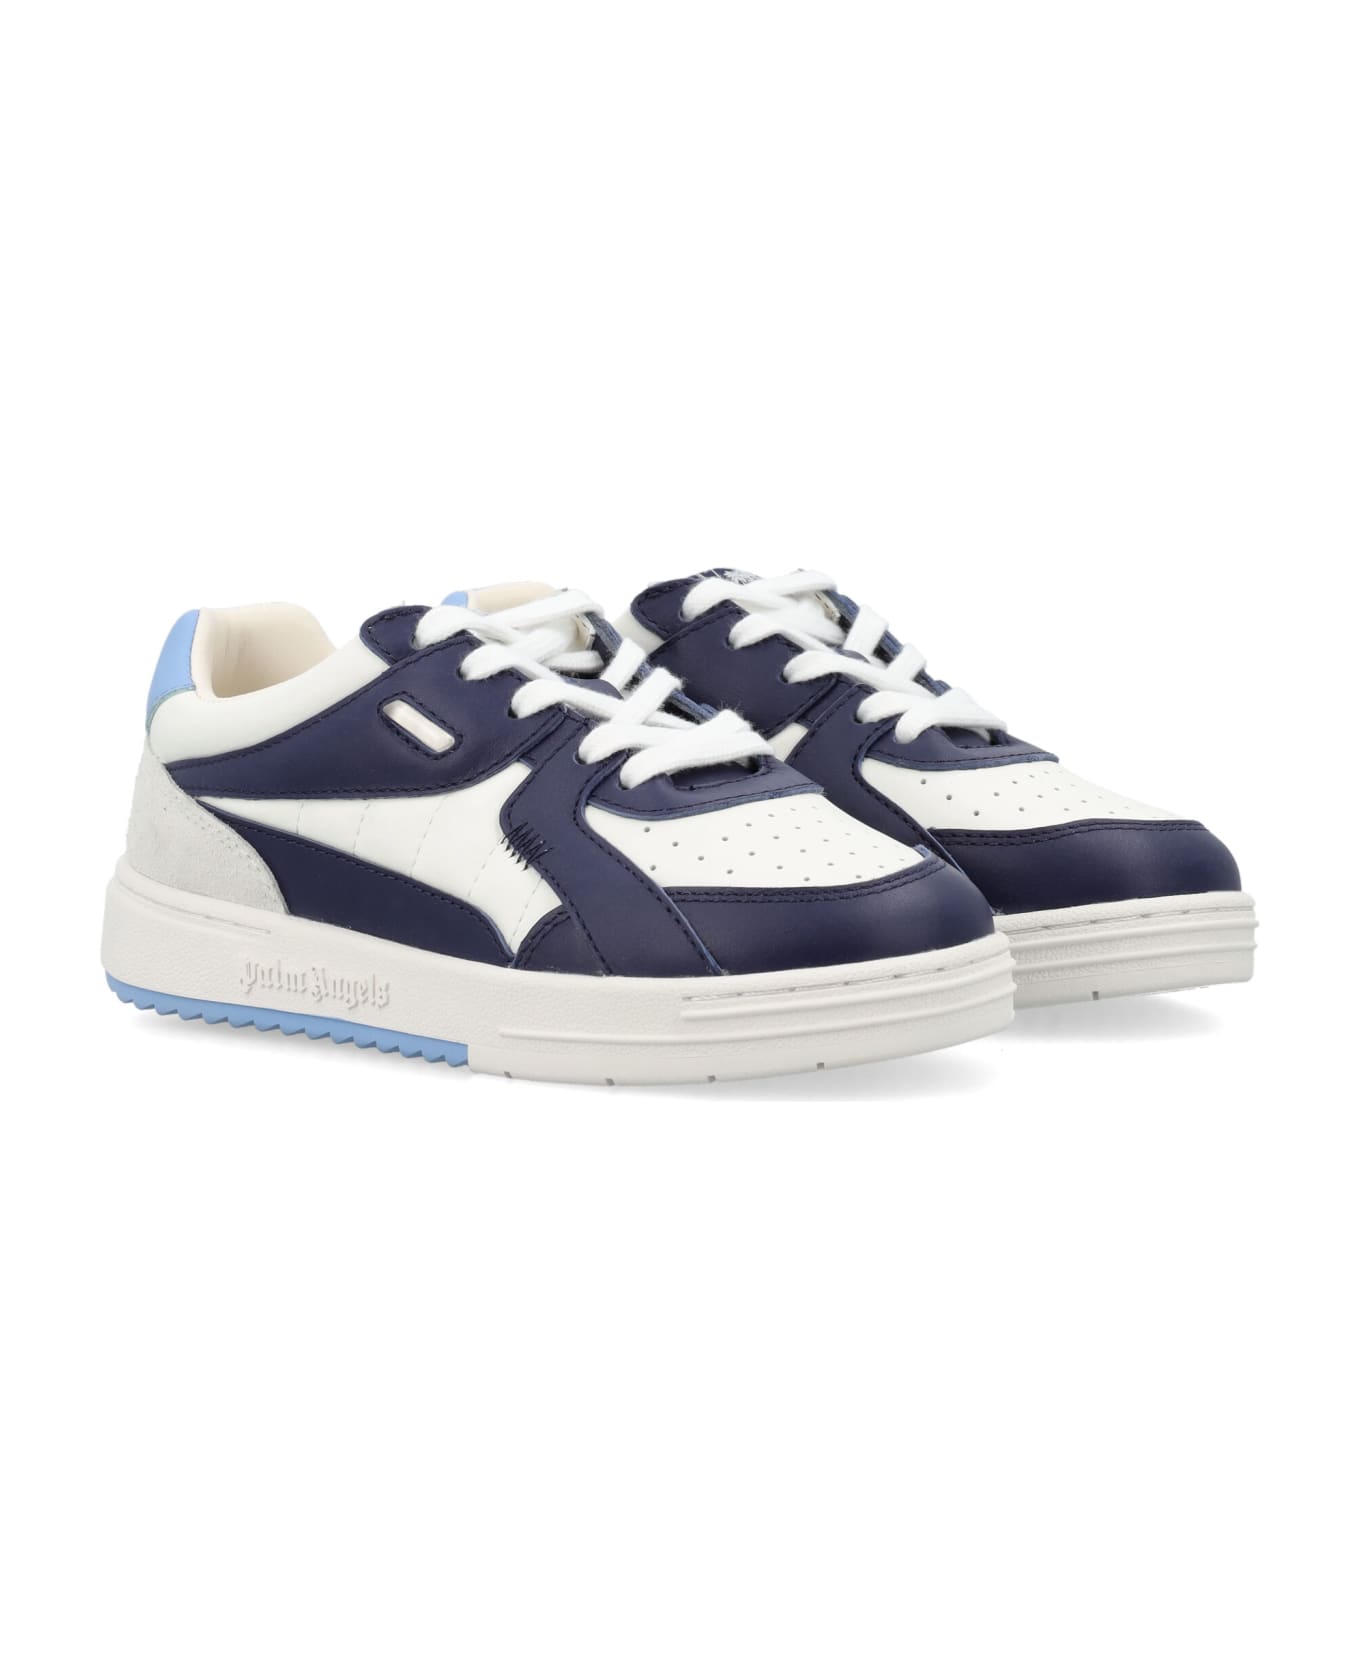 Palm Angels University Sneakers - WHITE BLUE